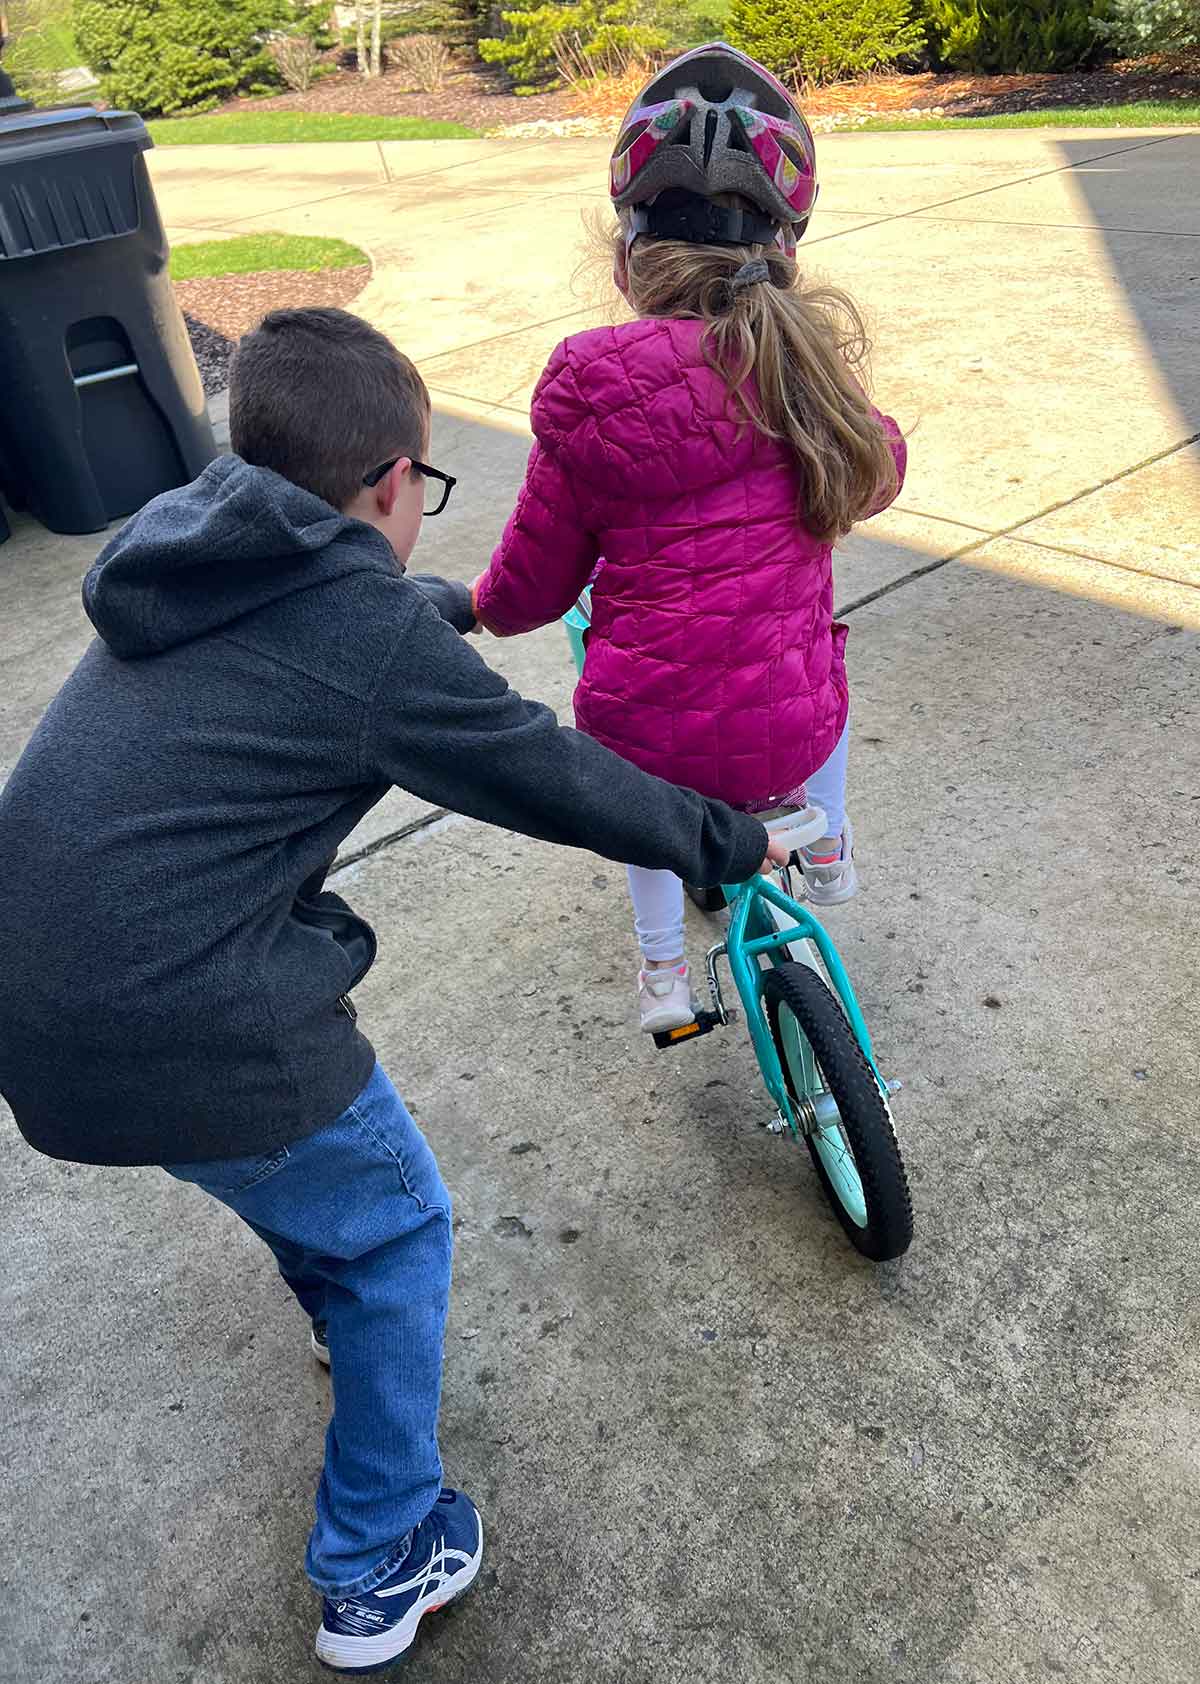 A boy helping a girl in a pink jacket on a bike in a driveway.